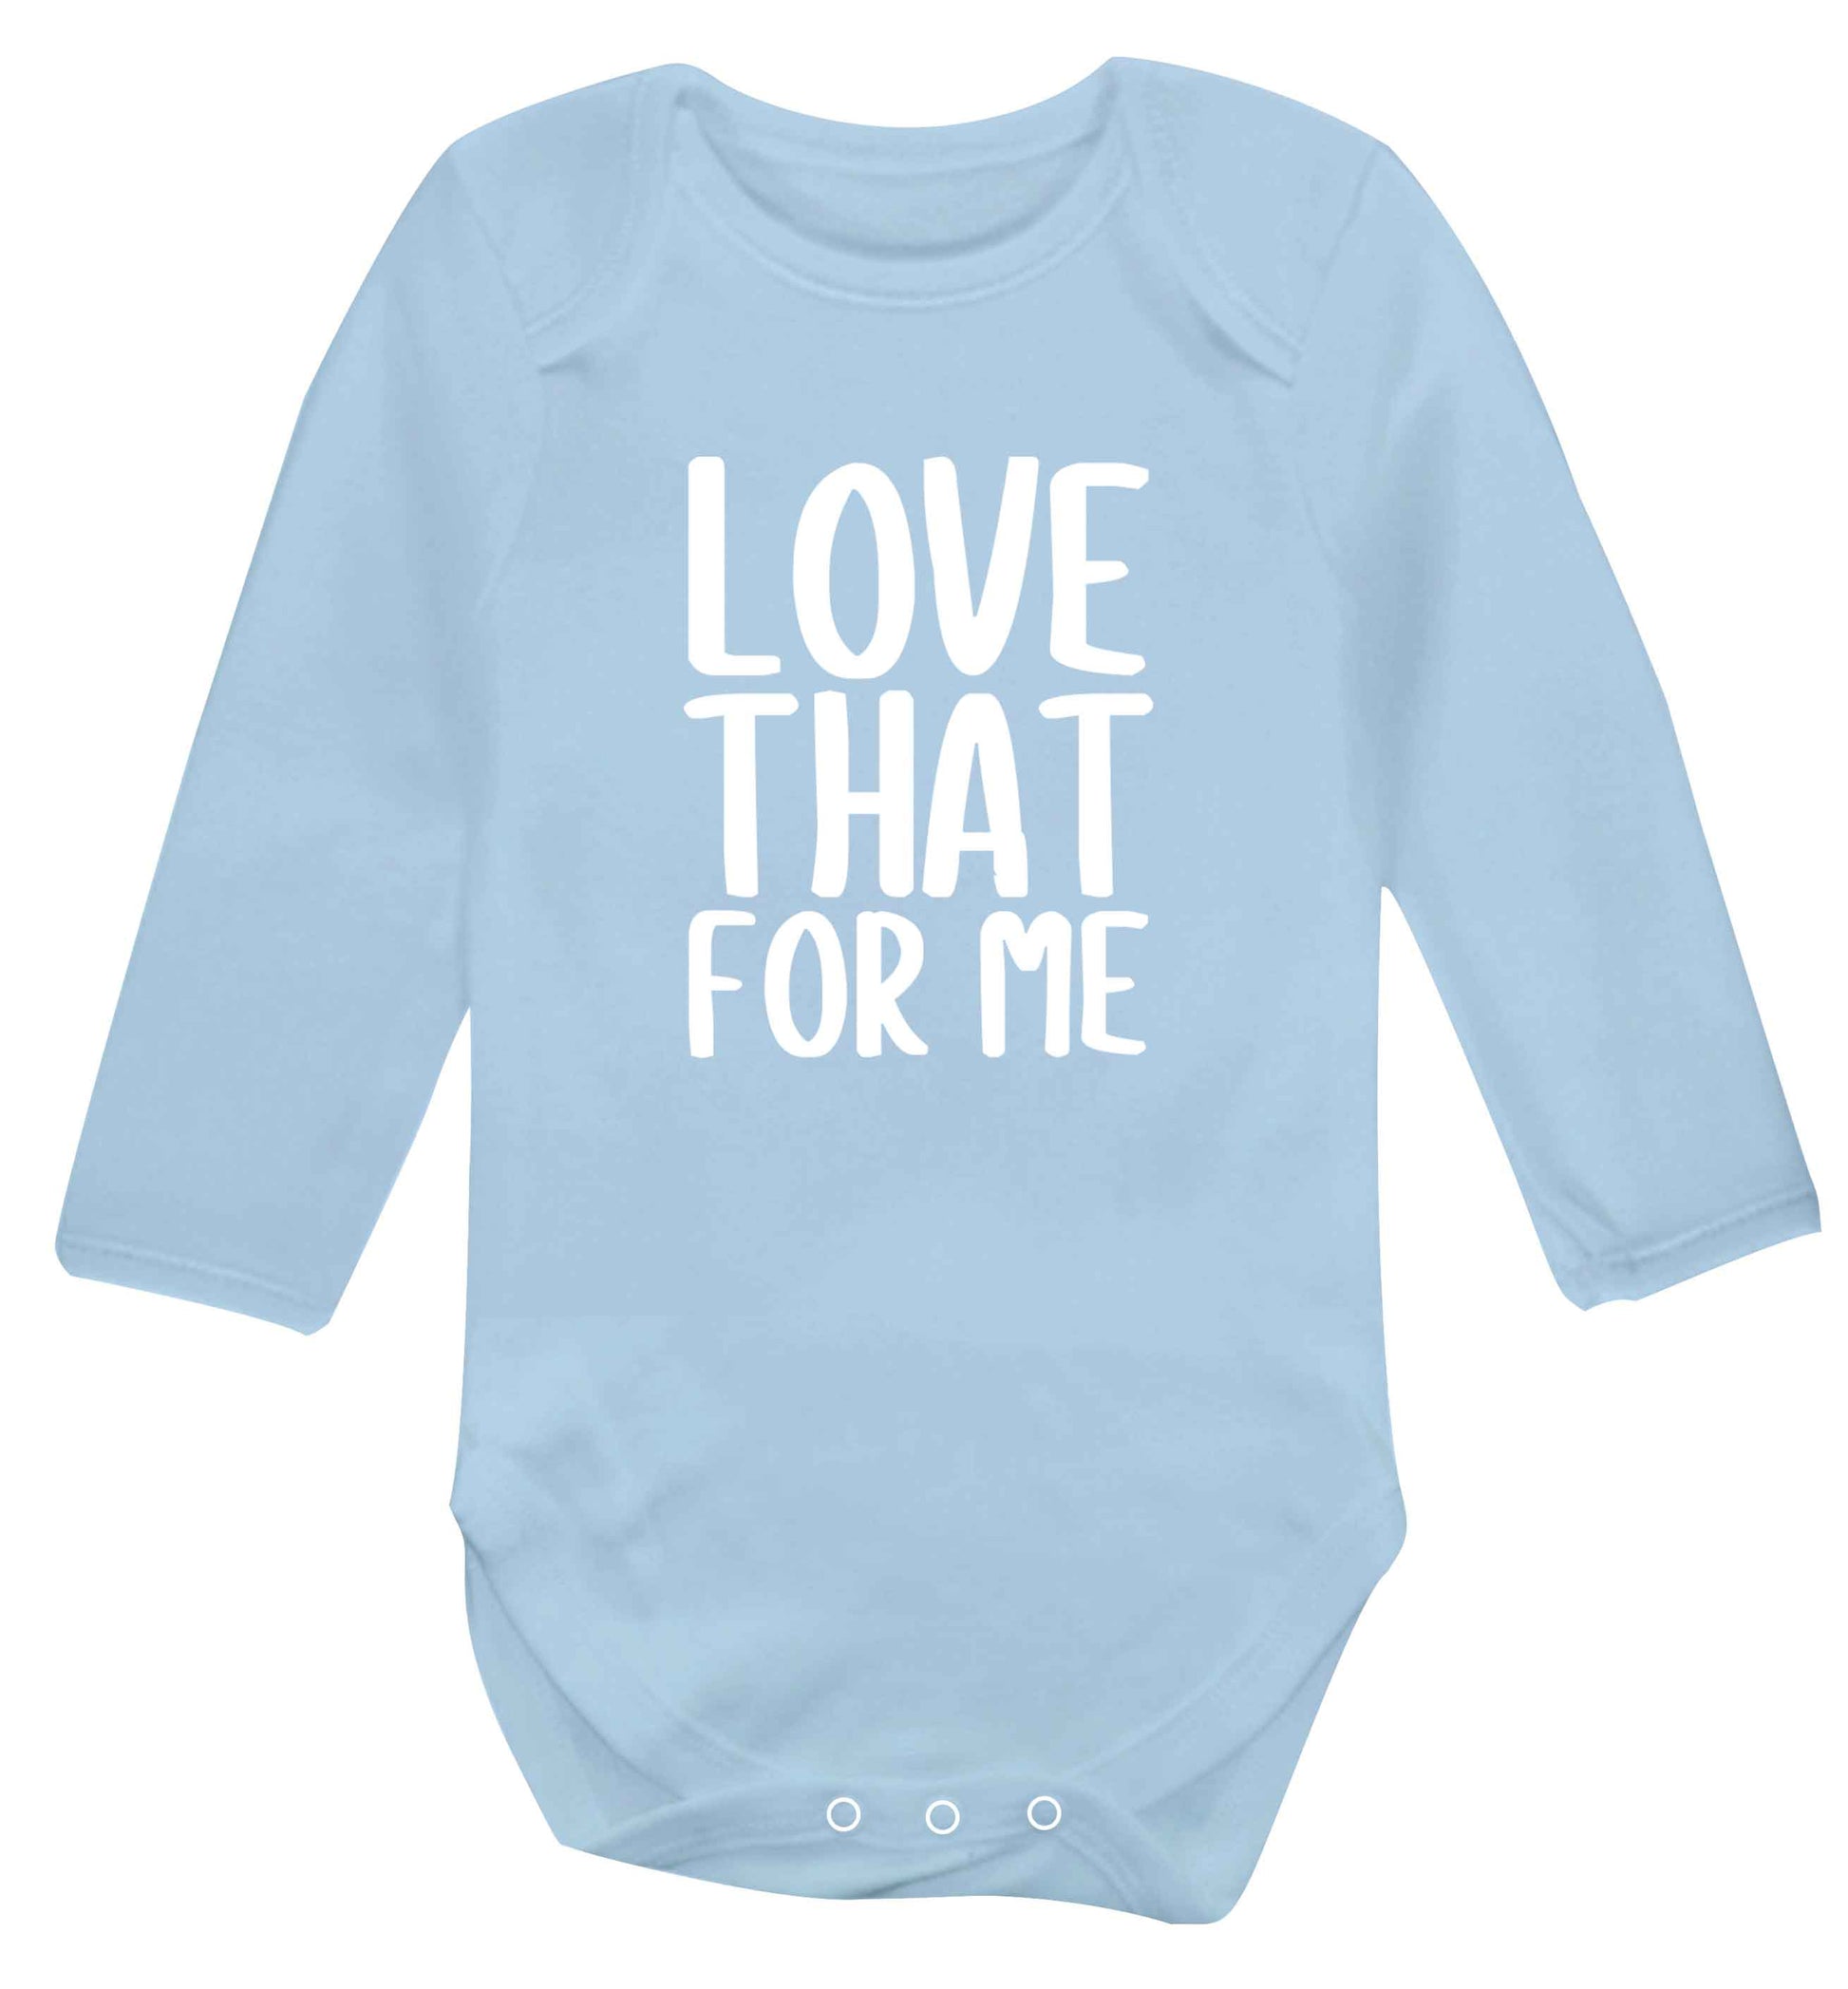 We love this for YOU! Who else loves saying this?!  baby vest long sleeved pale blue 6-12 months